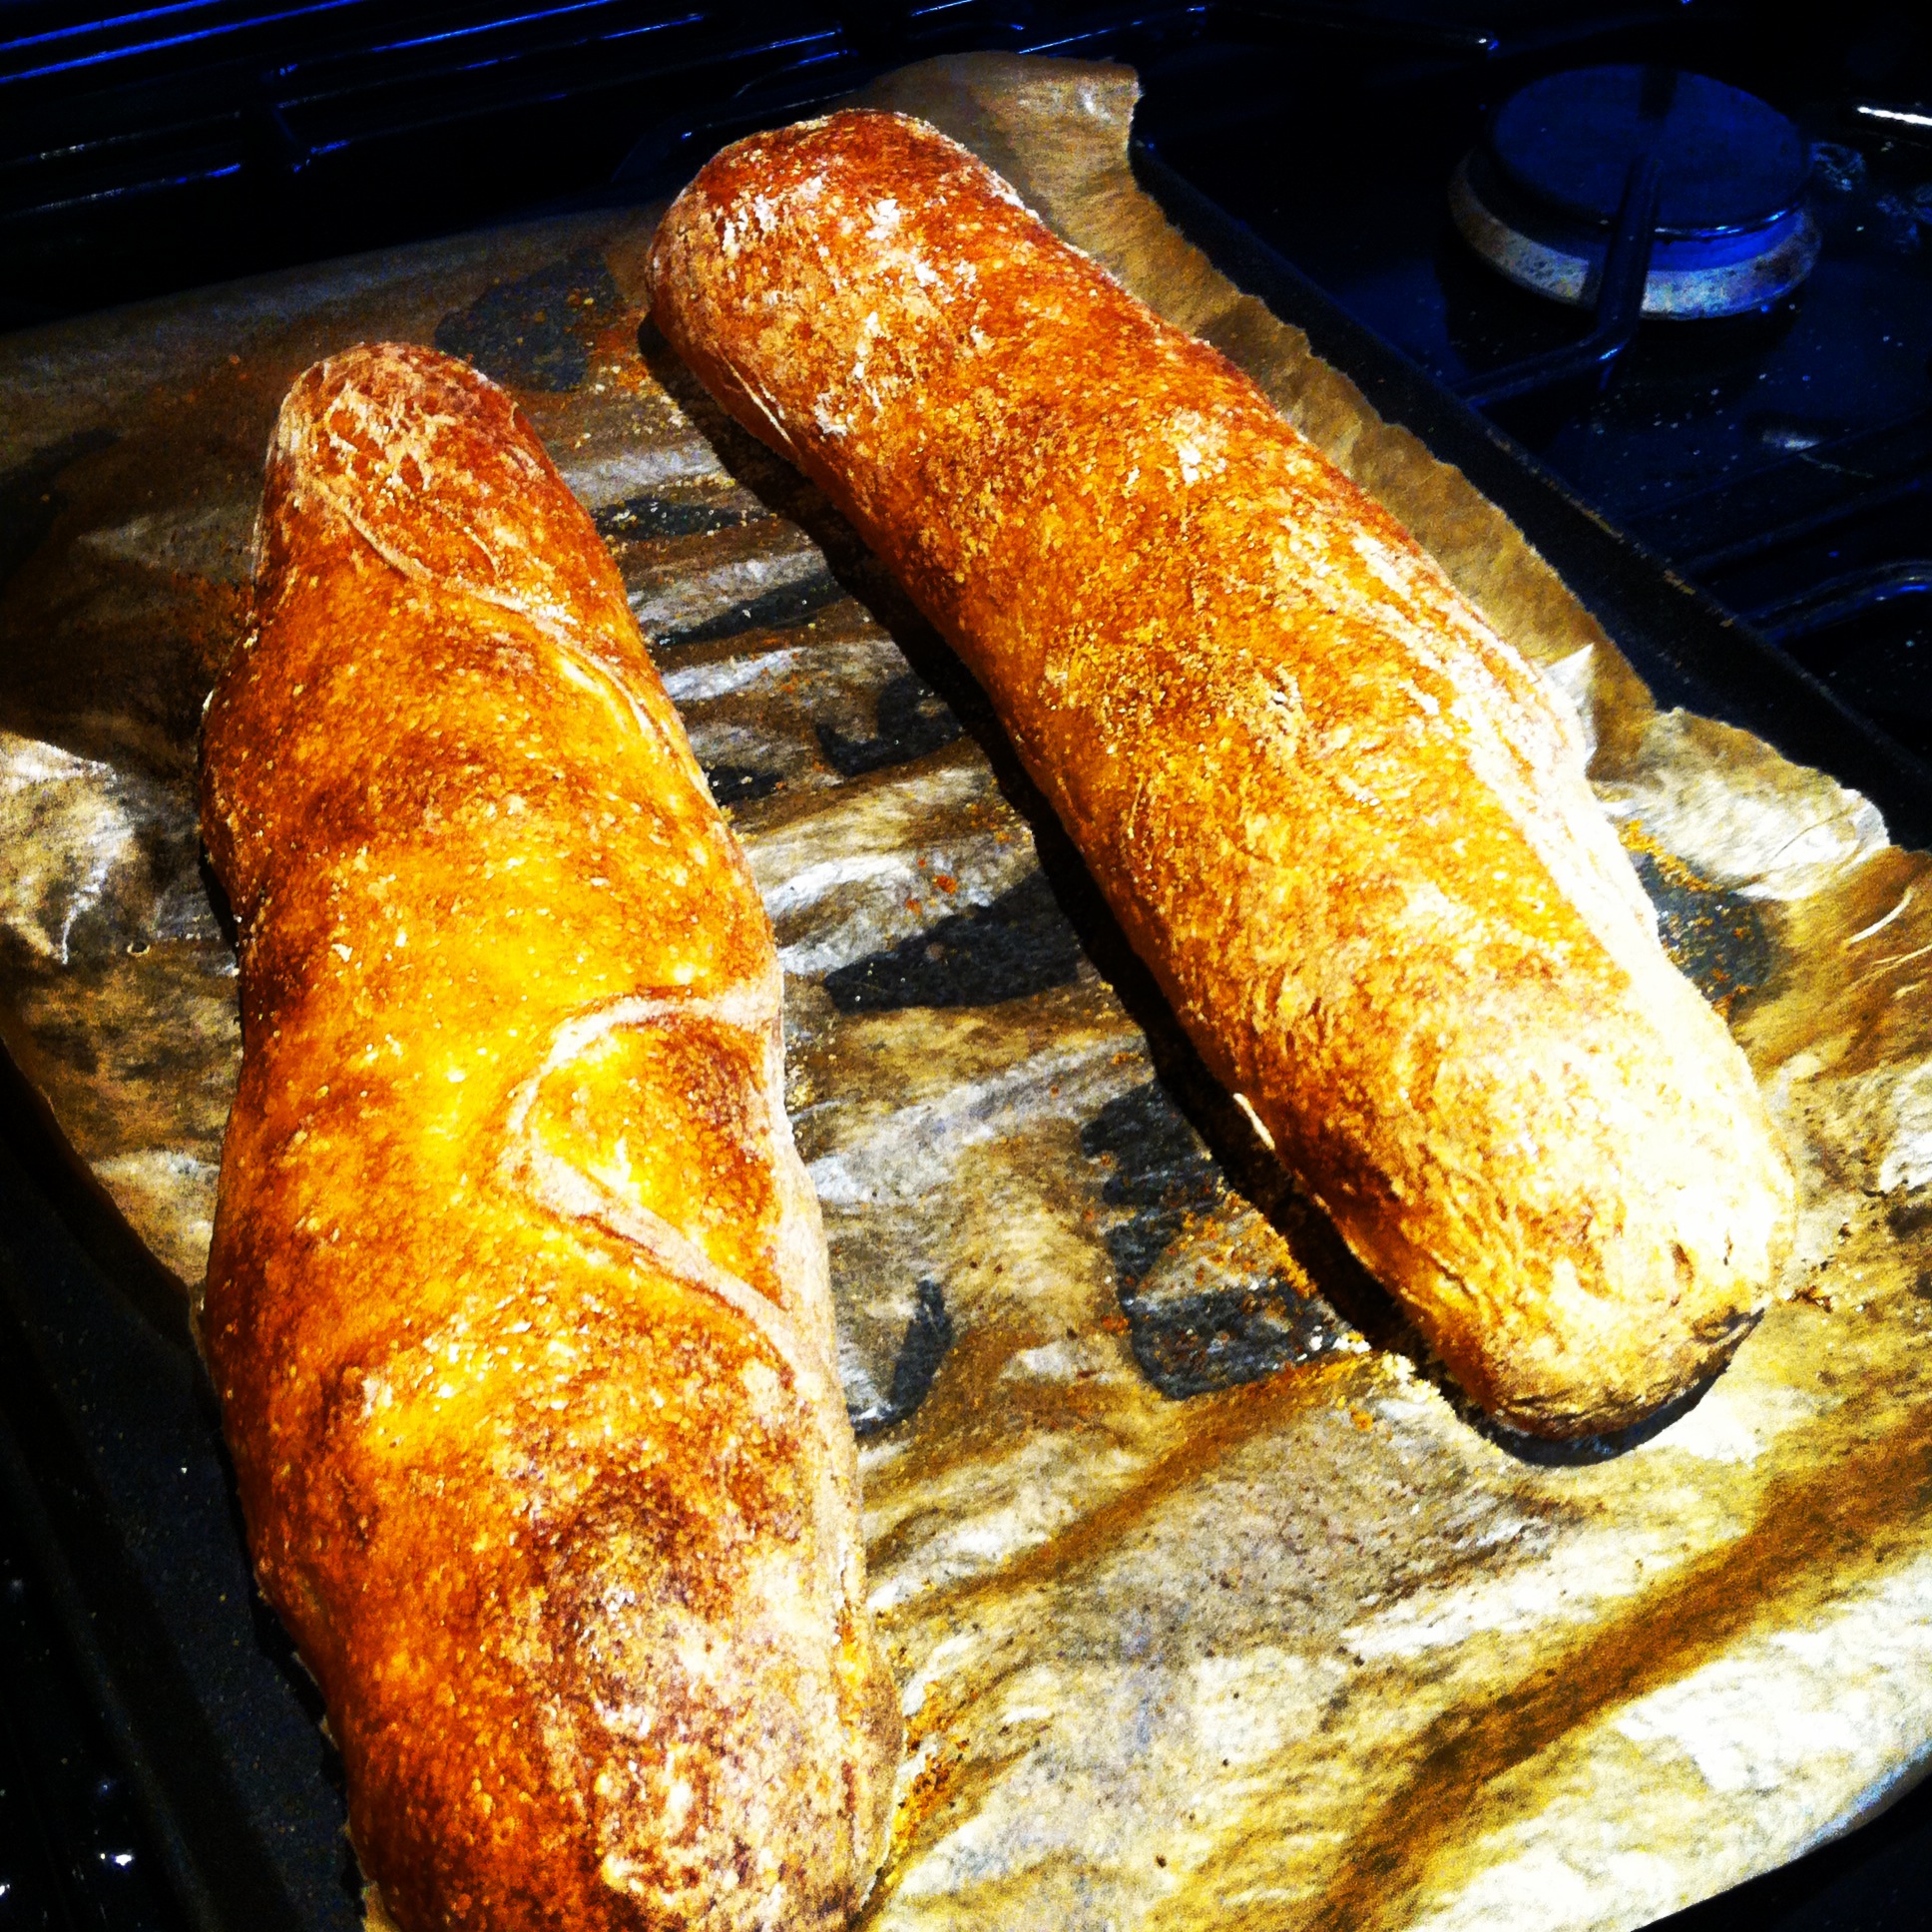 Home made Baguette: yes you can!